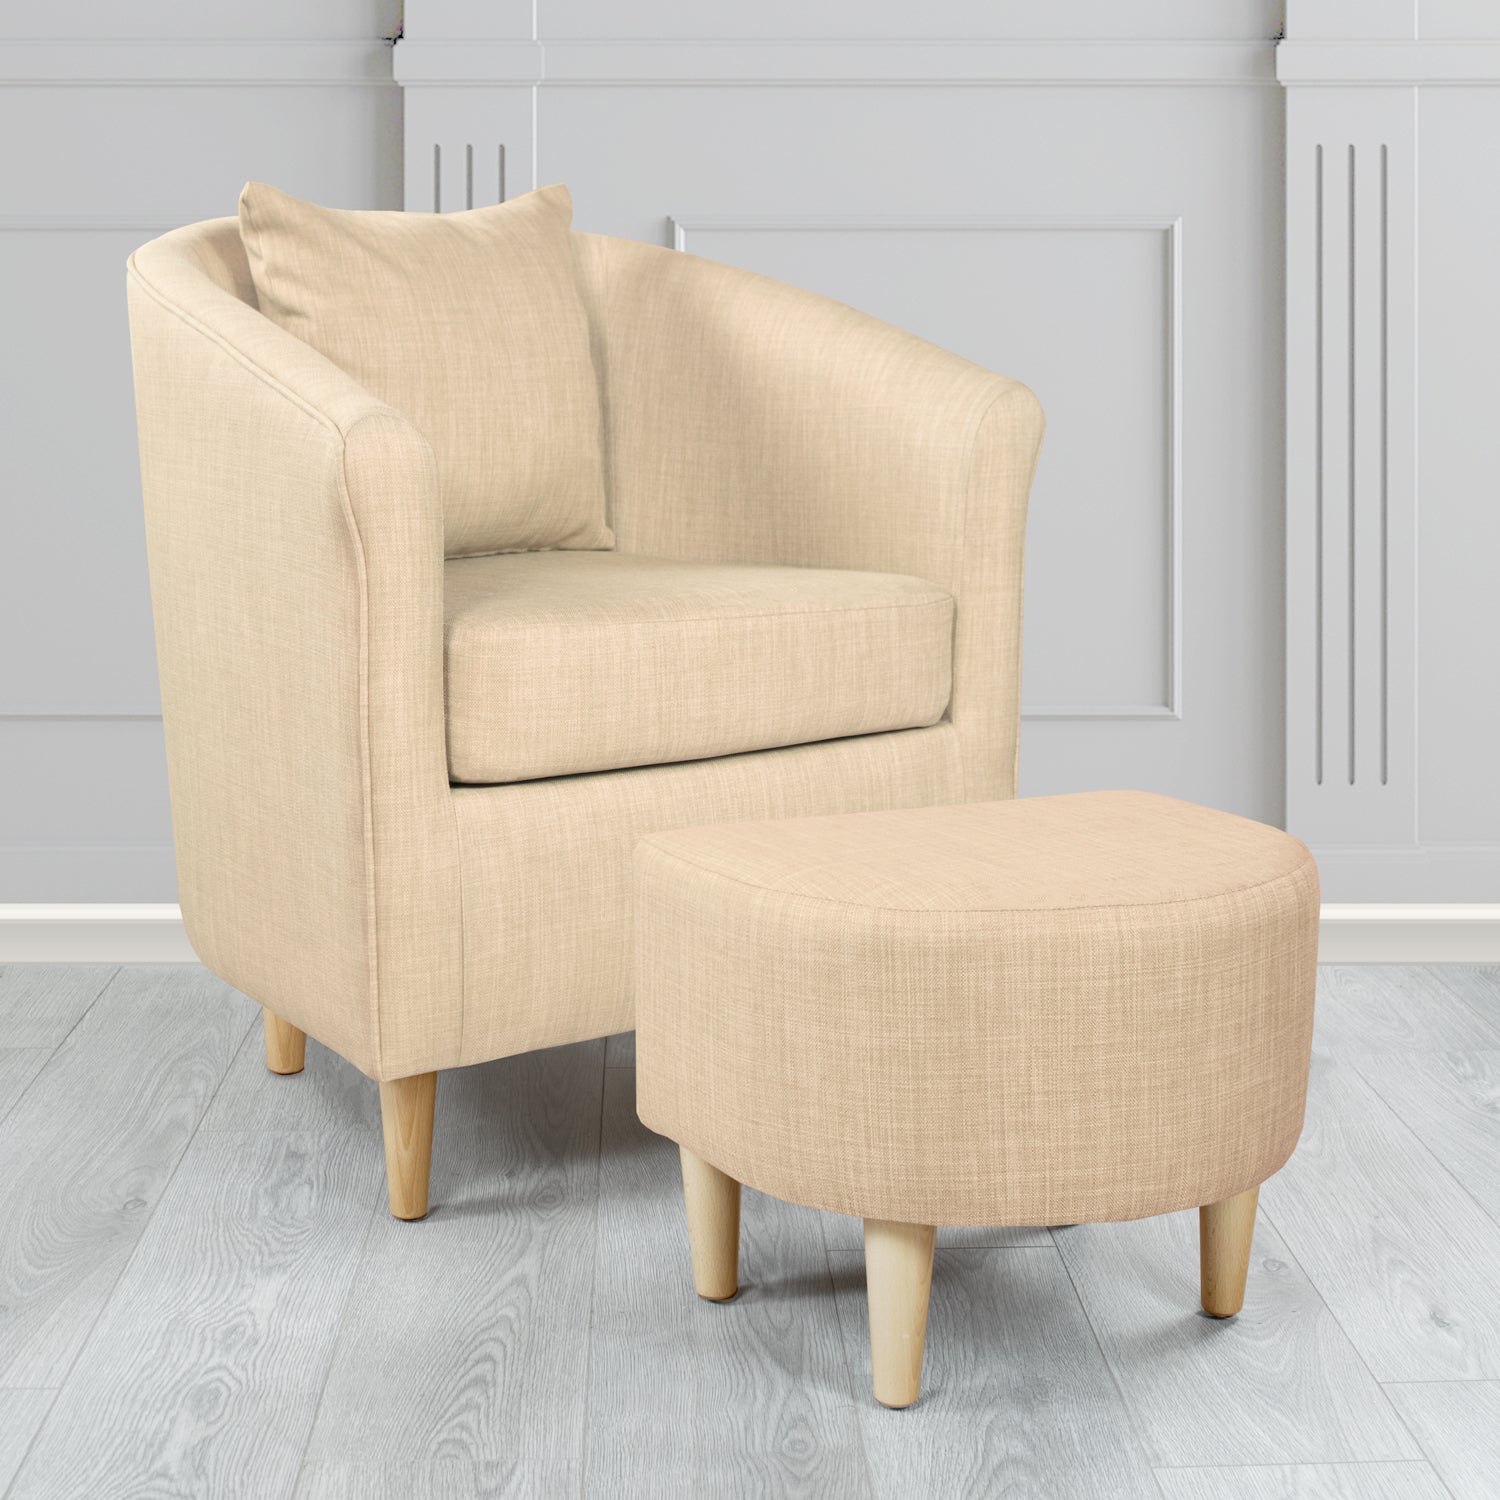 St Tropez Charles Pearl Plain Linen Fabric Tub Chair & Footstool Set with Scatter Cushion - The Tub Chair Shop